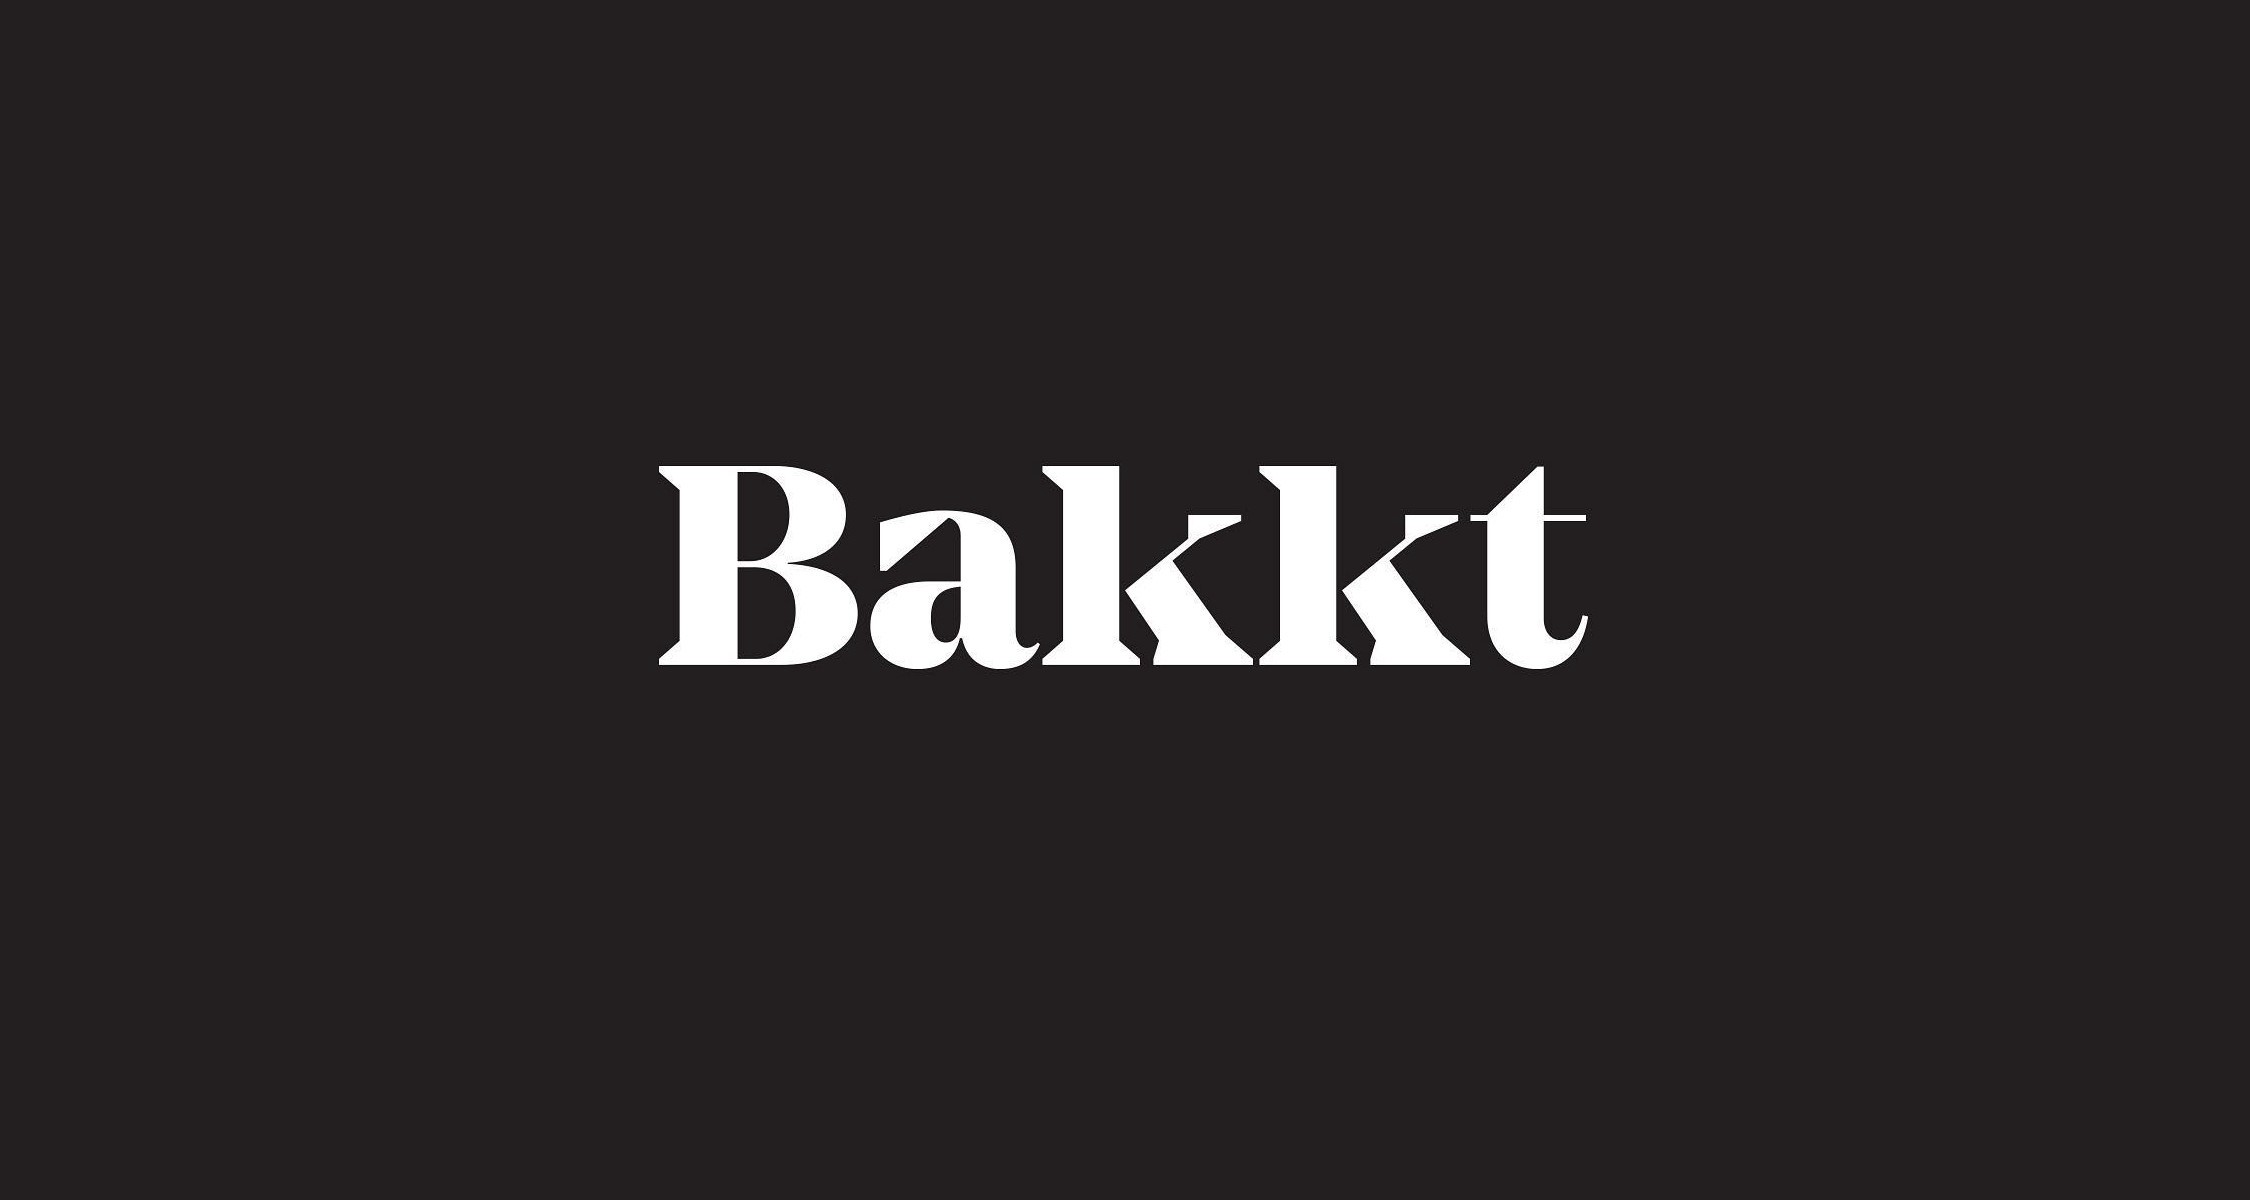 Bakkt Looks into Aggressive Expansion, Starts Building Merchant and Consumer Apps